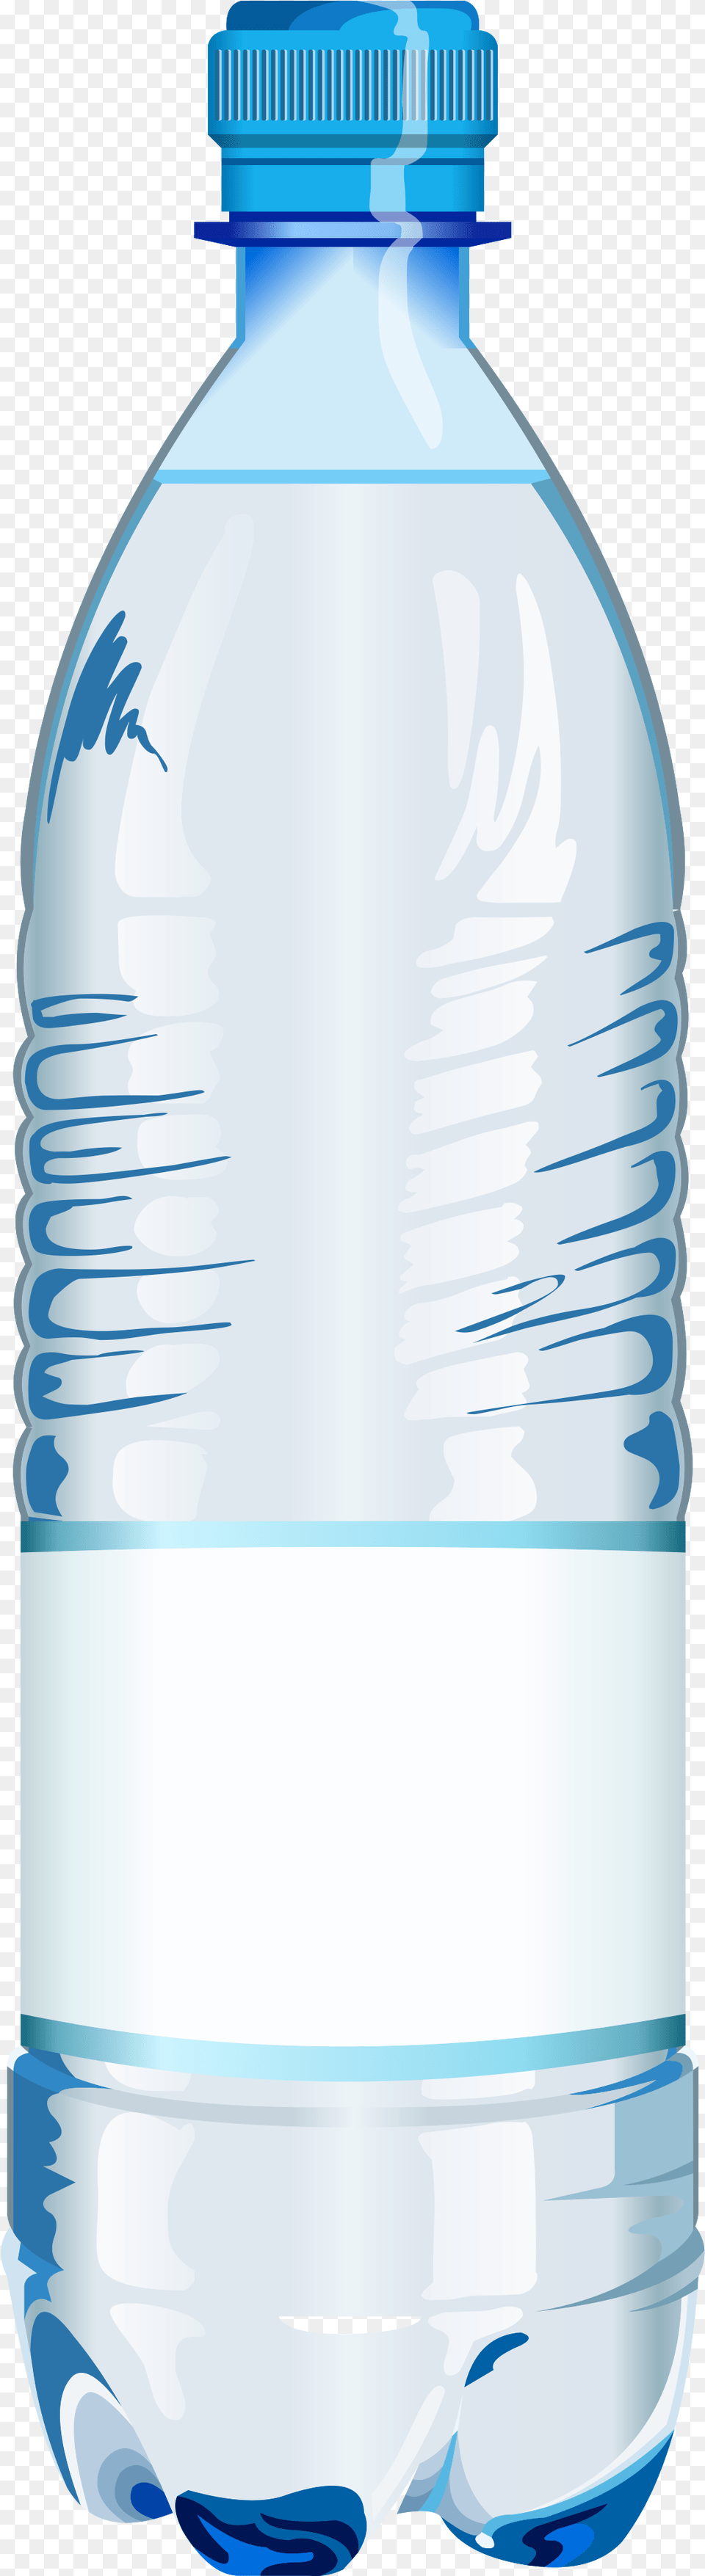 Small Bottle Of Mineral Water Clipart Bottled Mineral Water, Water Bottle, Beverage, Mineral Water, Shaker Png